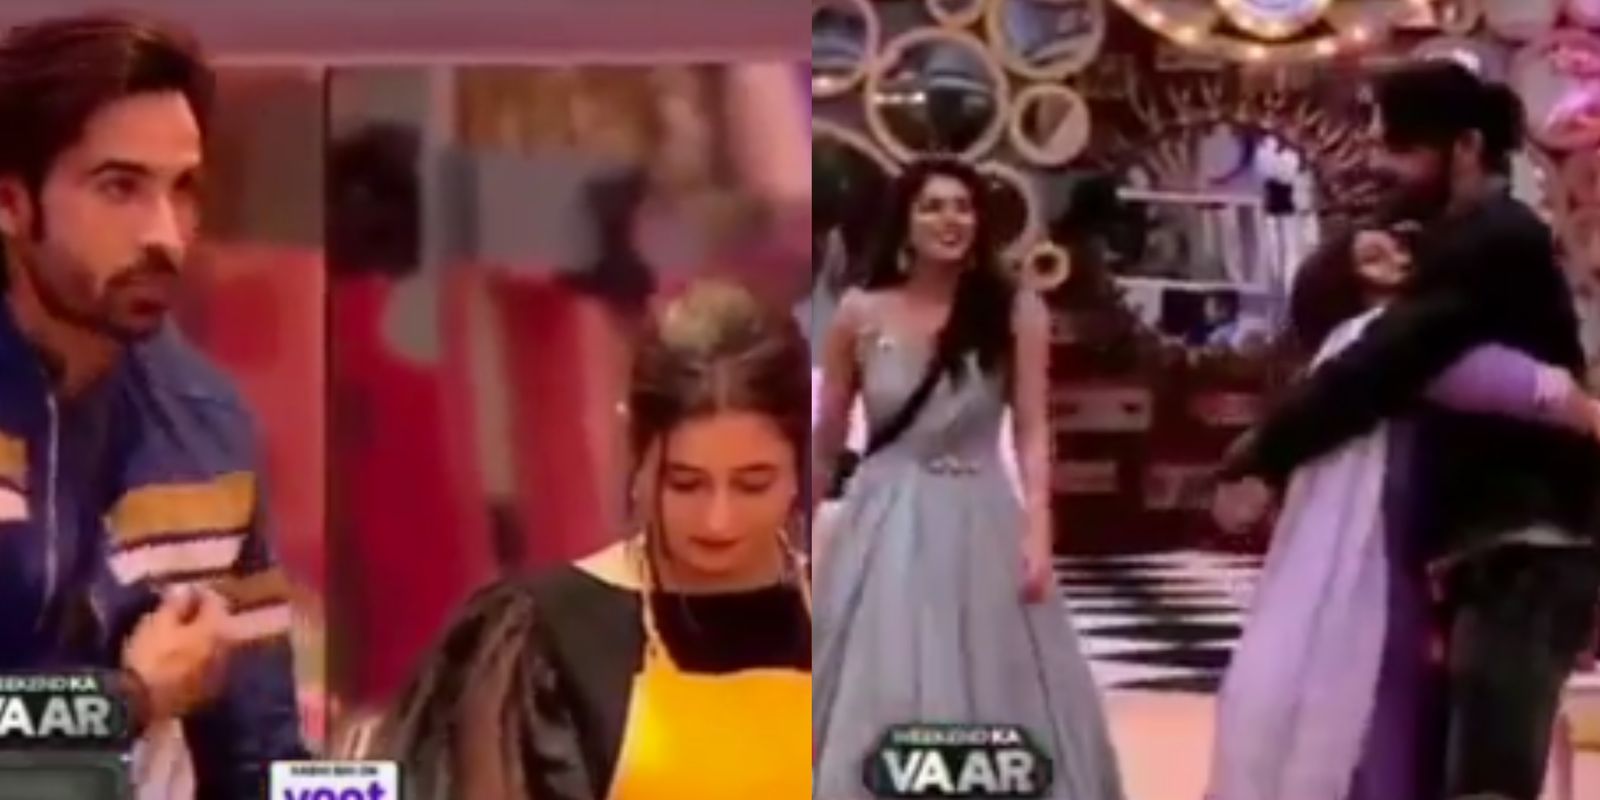 Bigg Boss 13 Preview: Arhaan Proposes To Rashami While She Ignores, Madhurima Tuli And Shefali Bagga Also Enter! Watch Video...